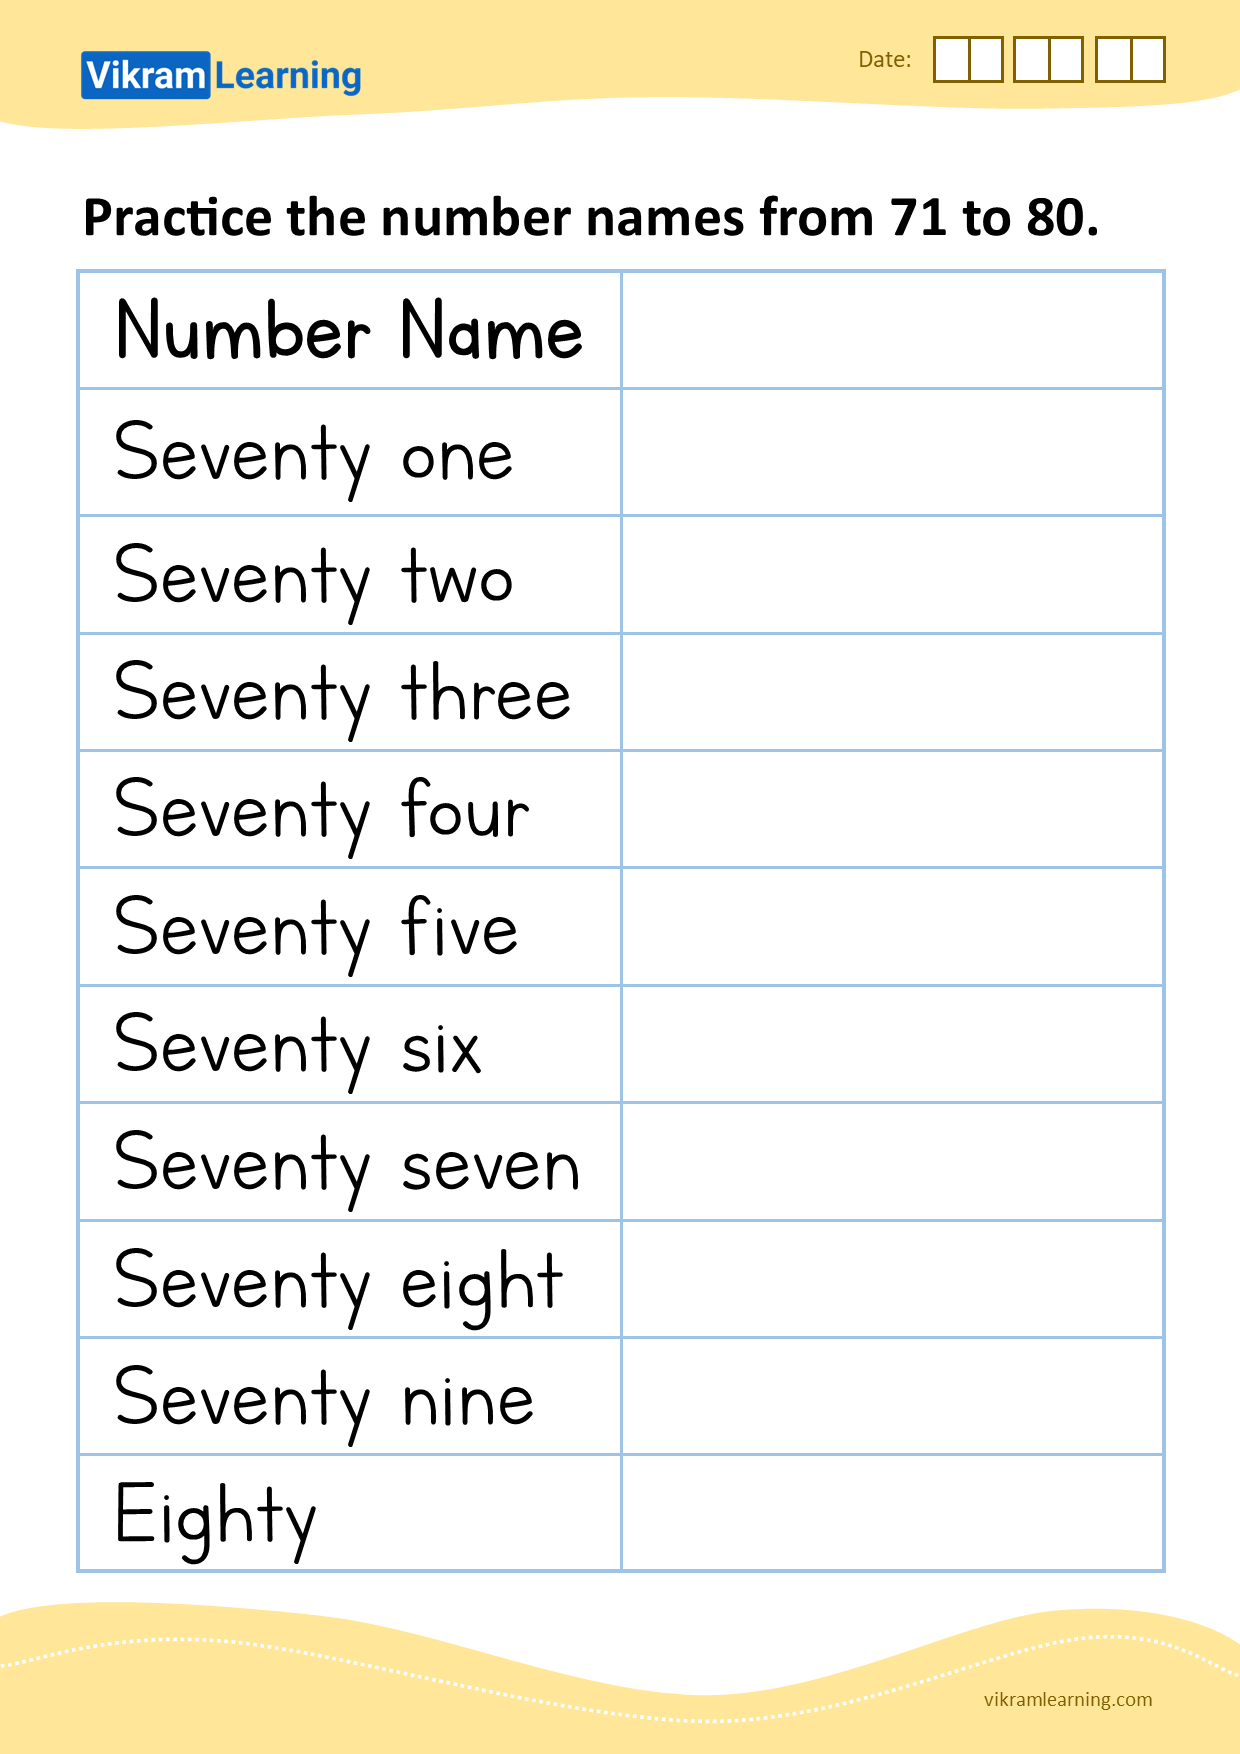 Download practice the number names from 71 to 80 worksheets